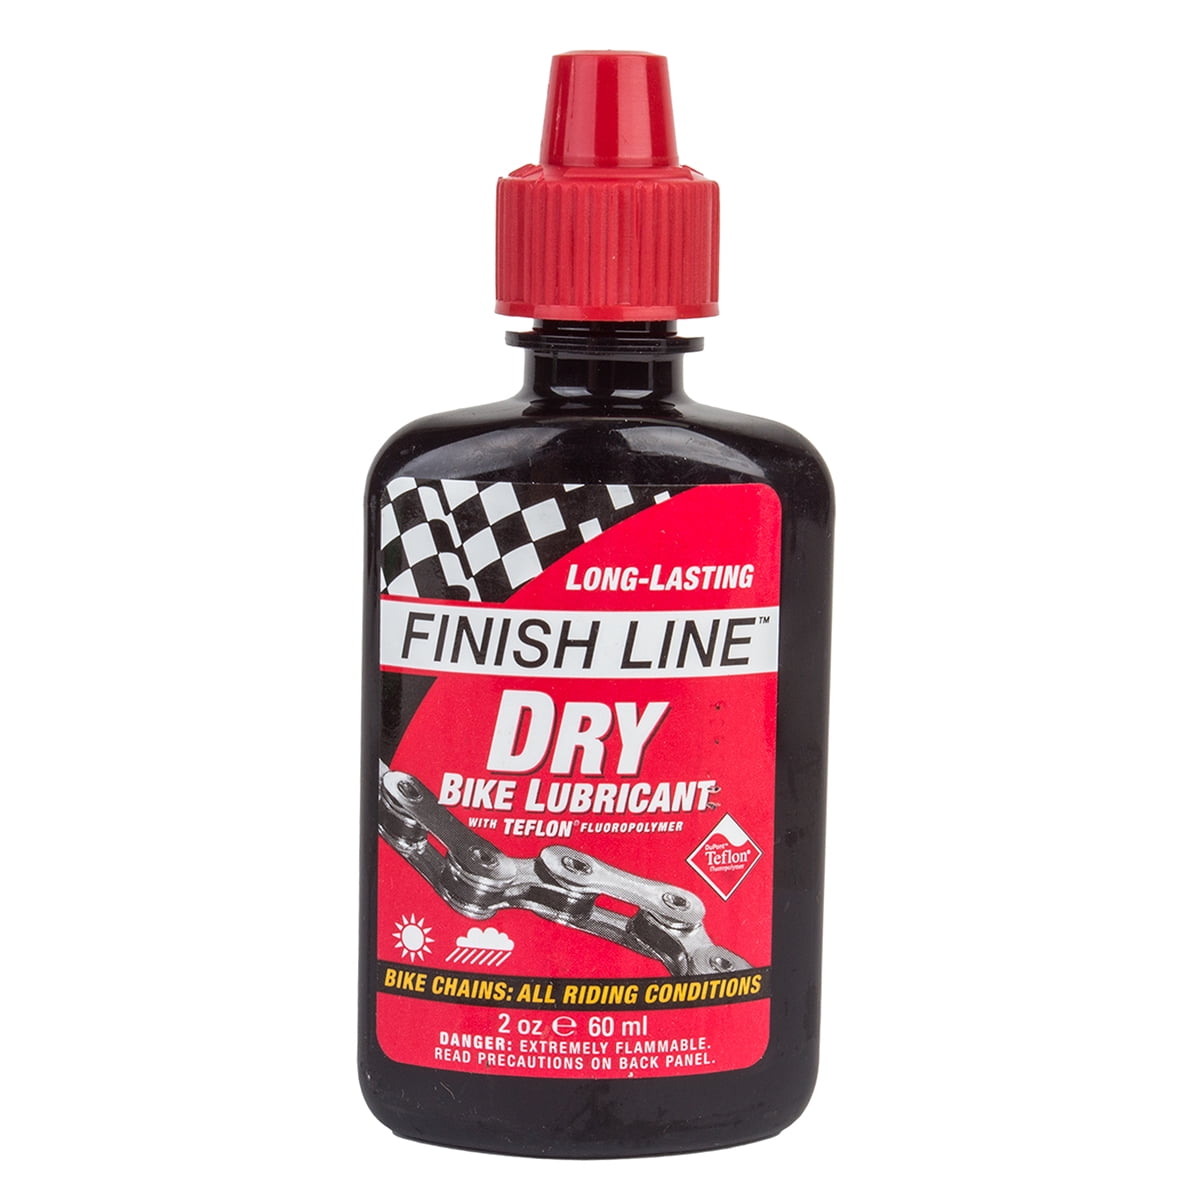 Finish Line - Bicycle Lubricants and Care ProductsAbsorb-It™ Mat